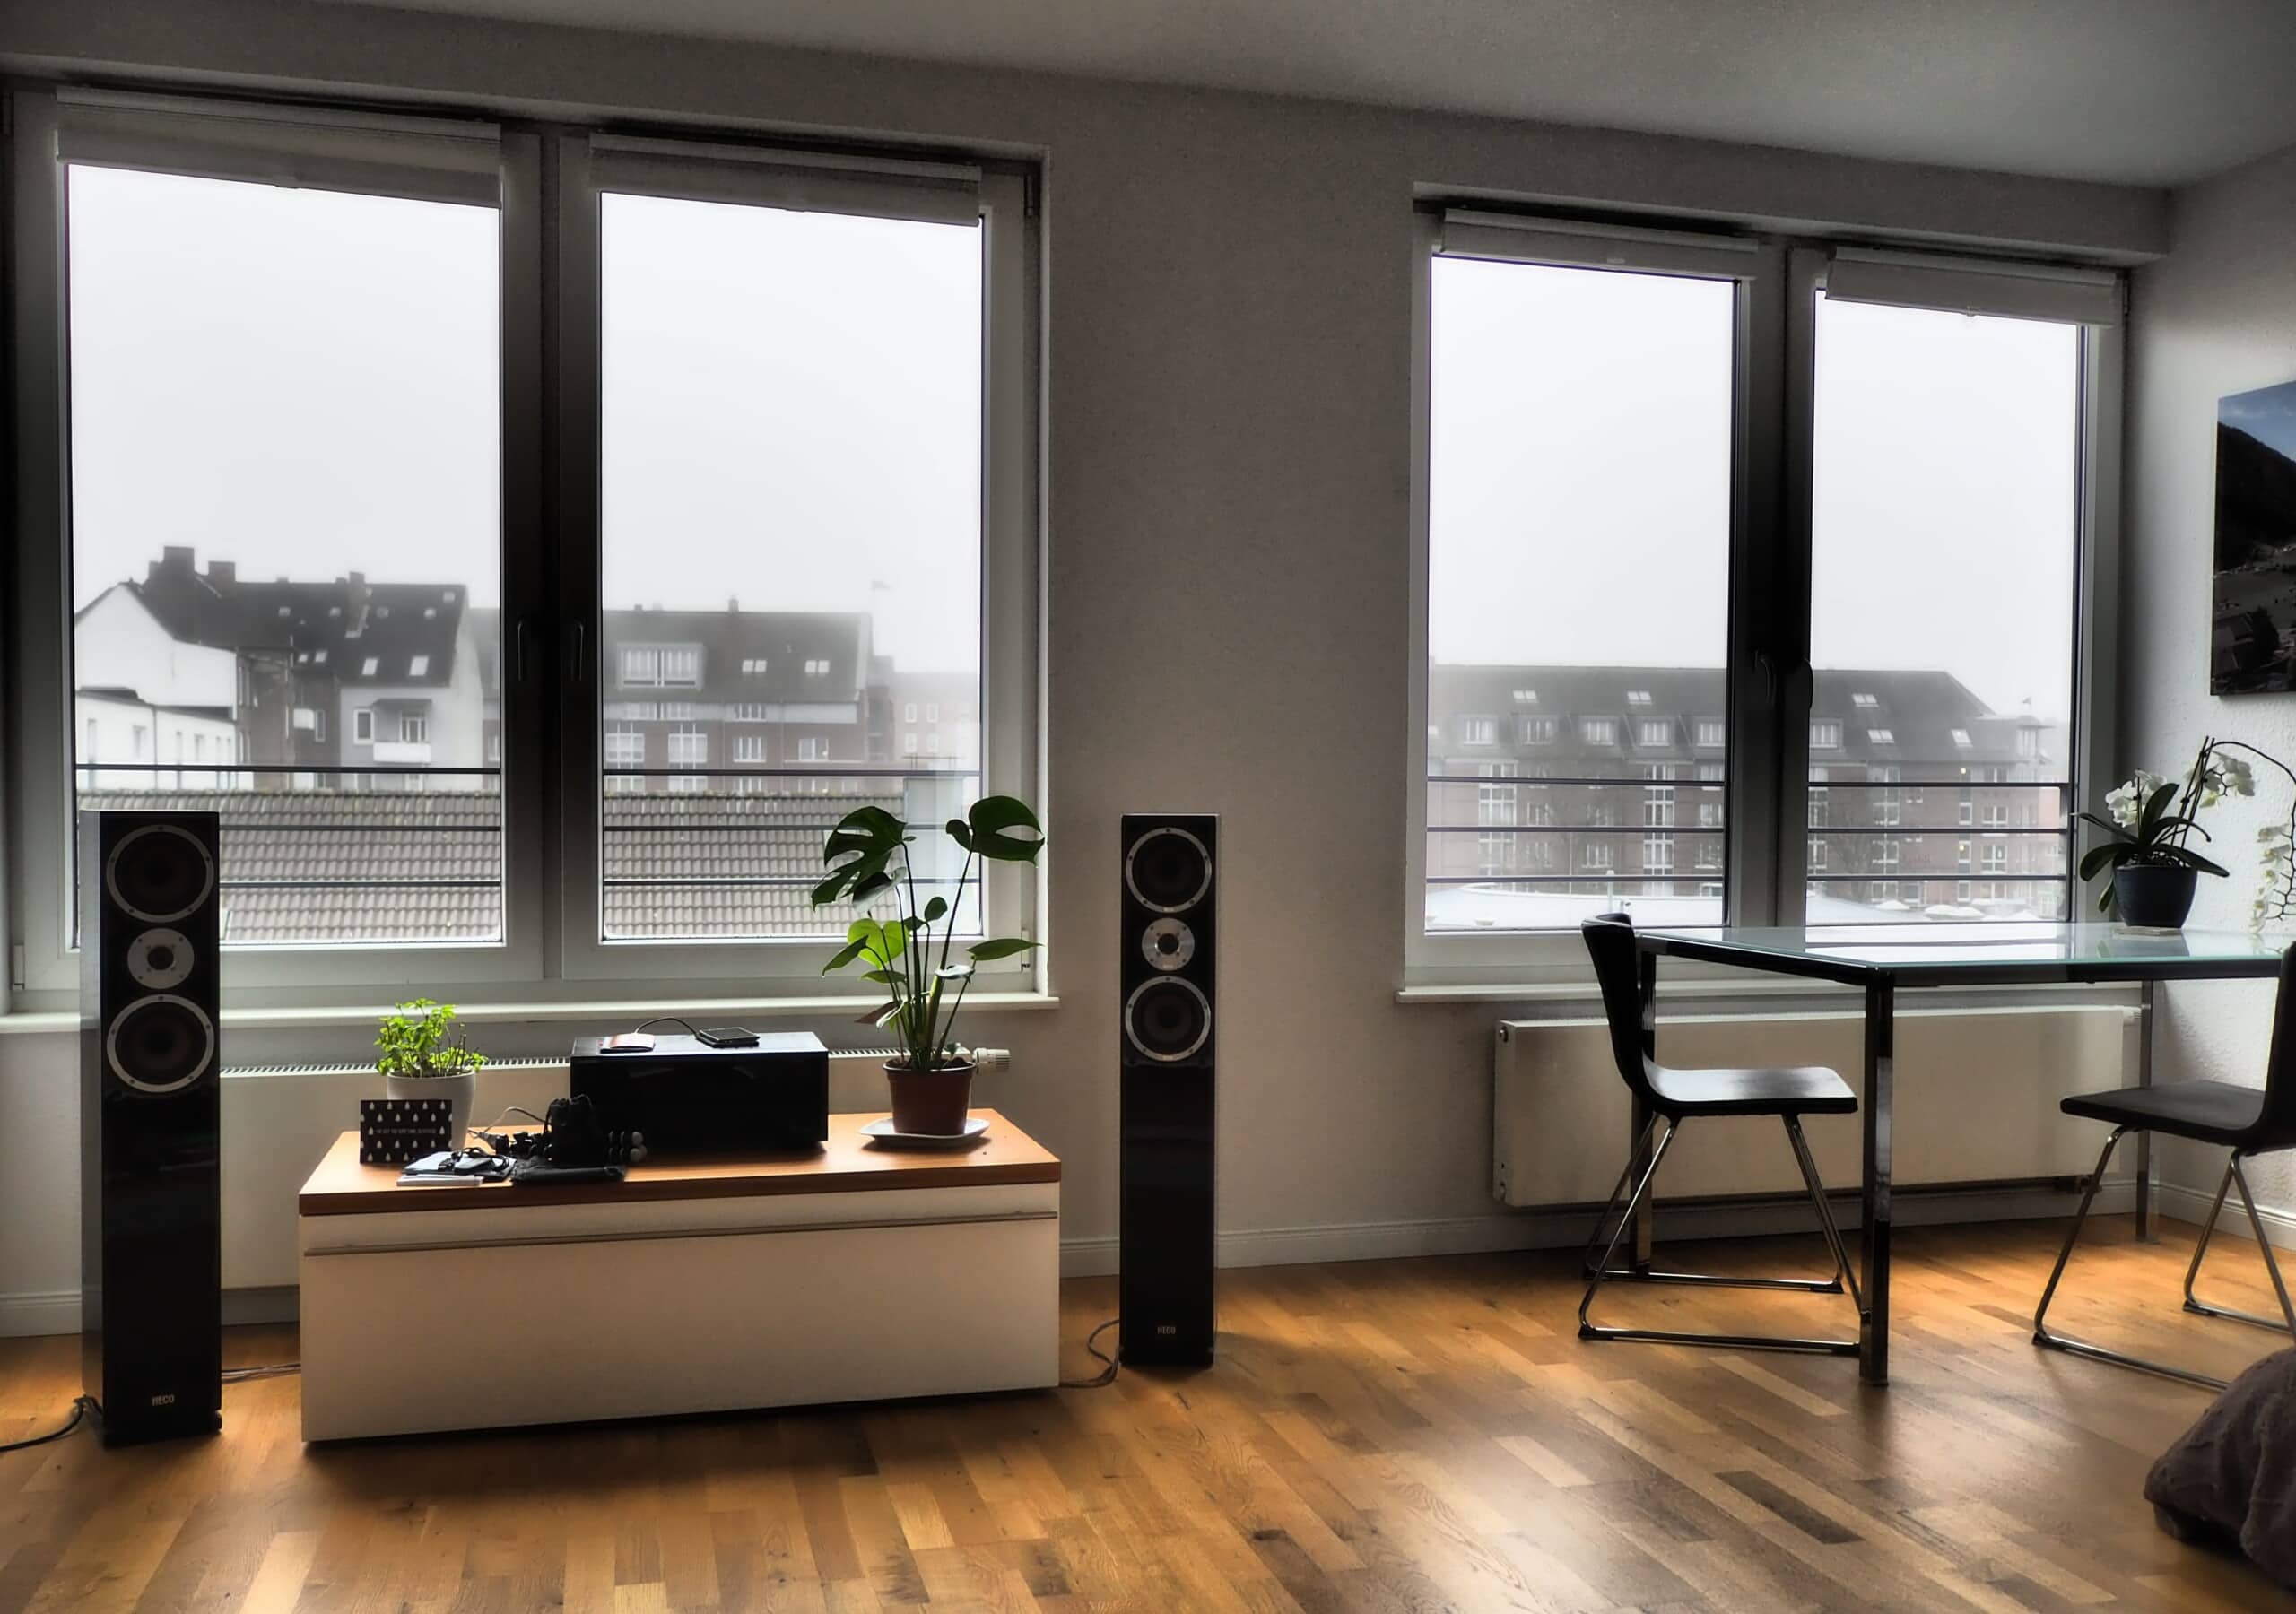 Home Theater: Advantages of Floor-Standing Speakers